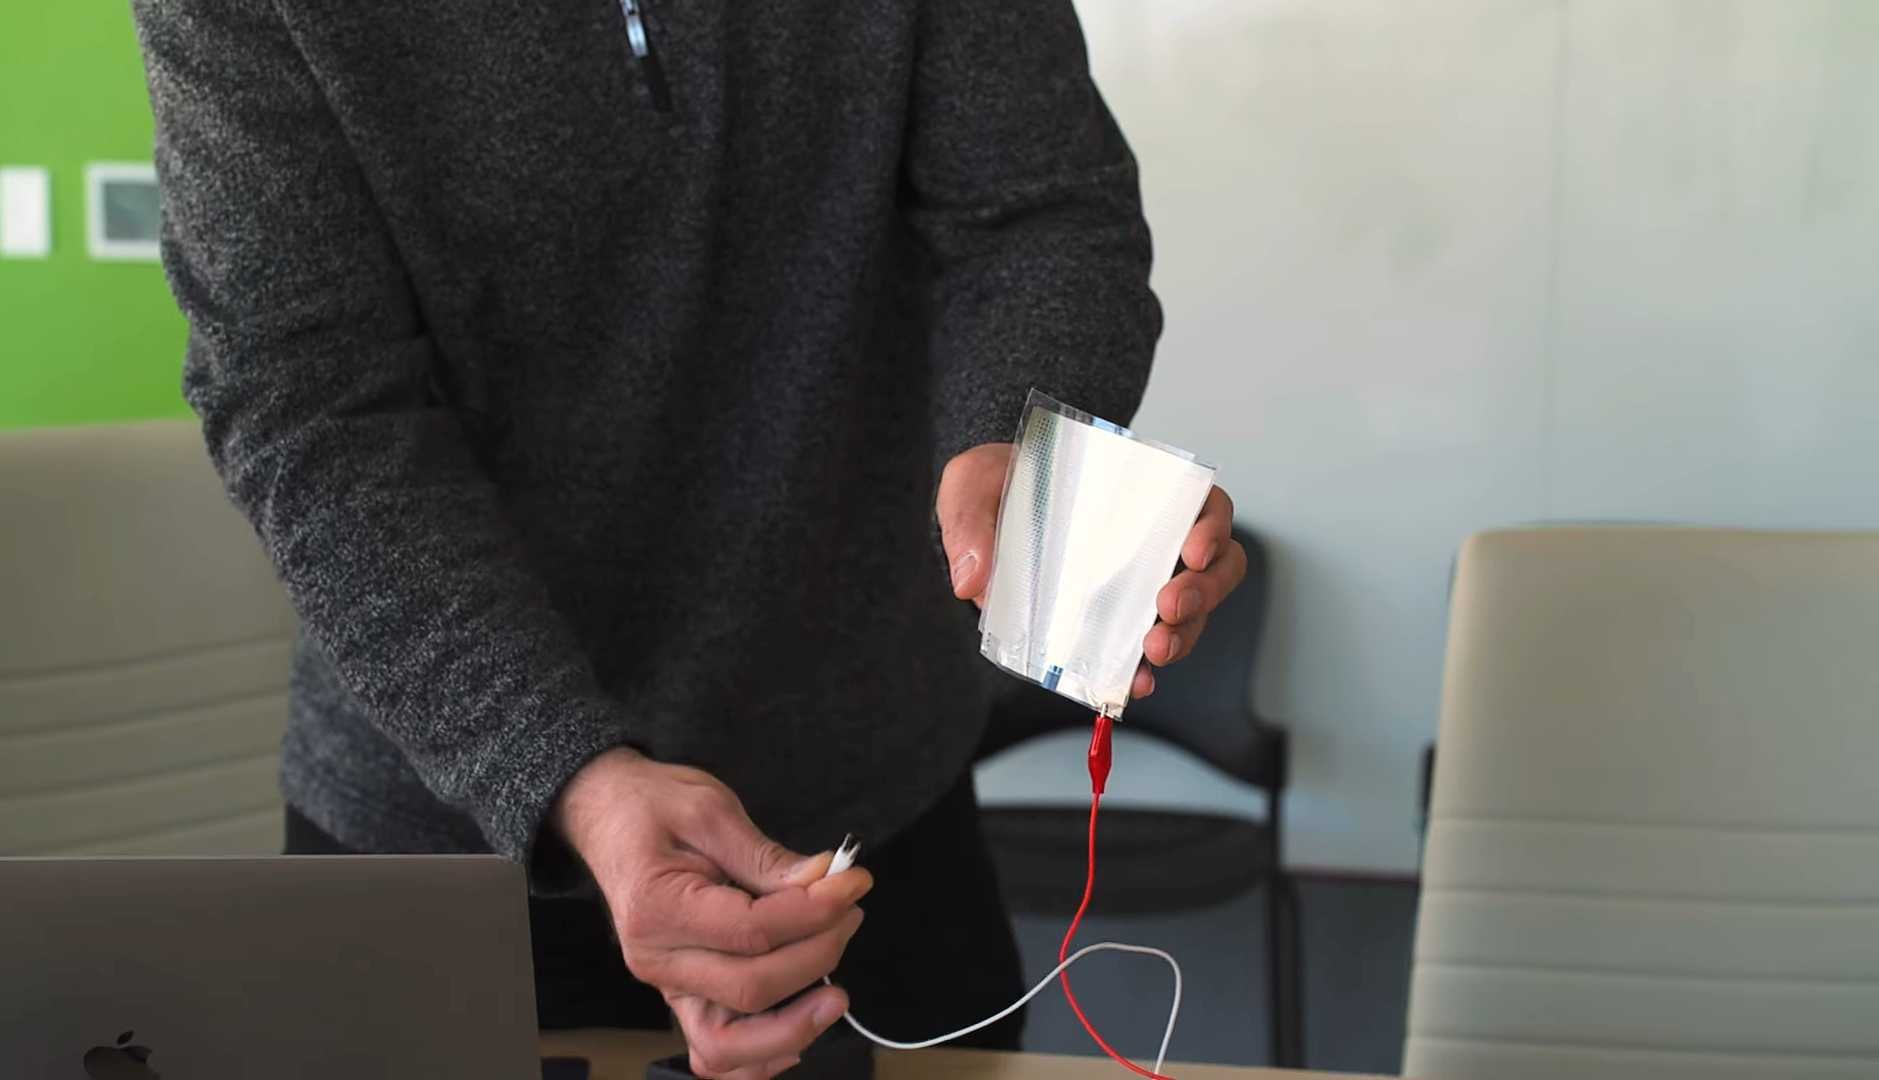 MIT engineers have developed a paper-thin loudspeaker that turns any surface into an audio source